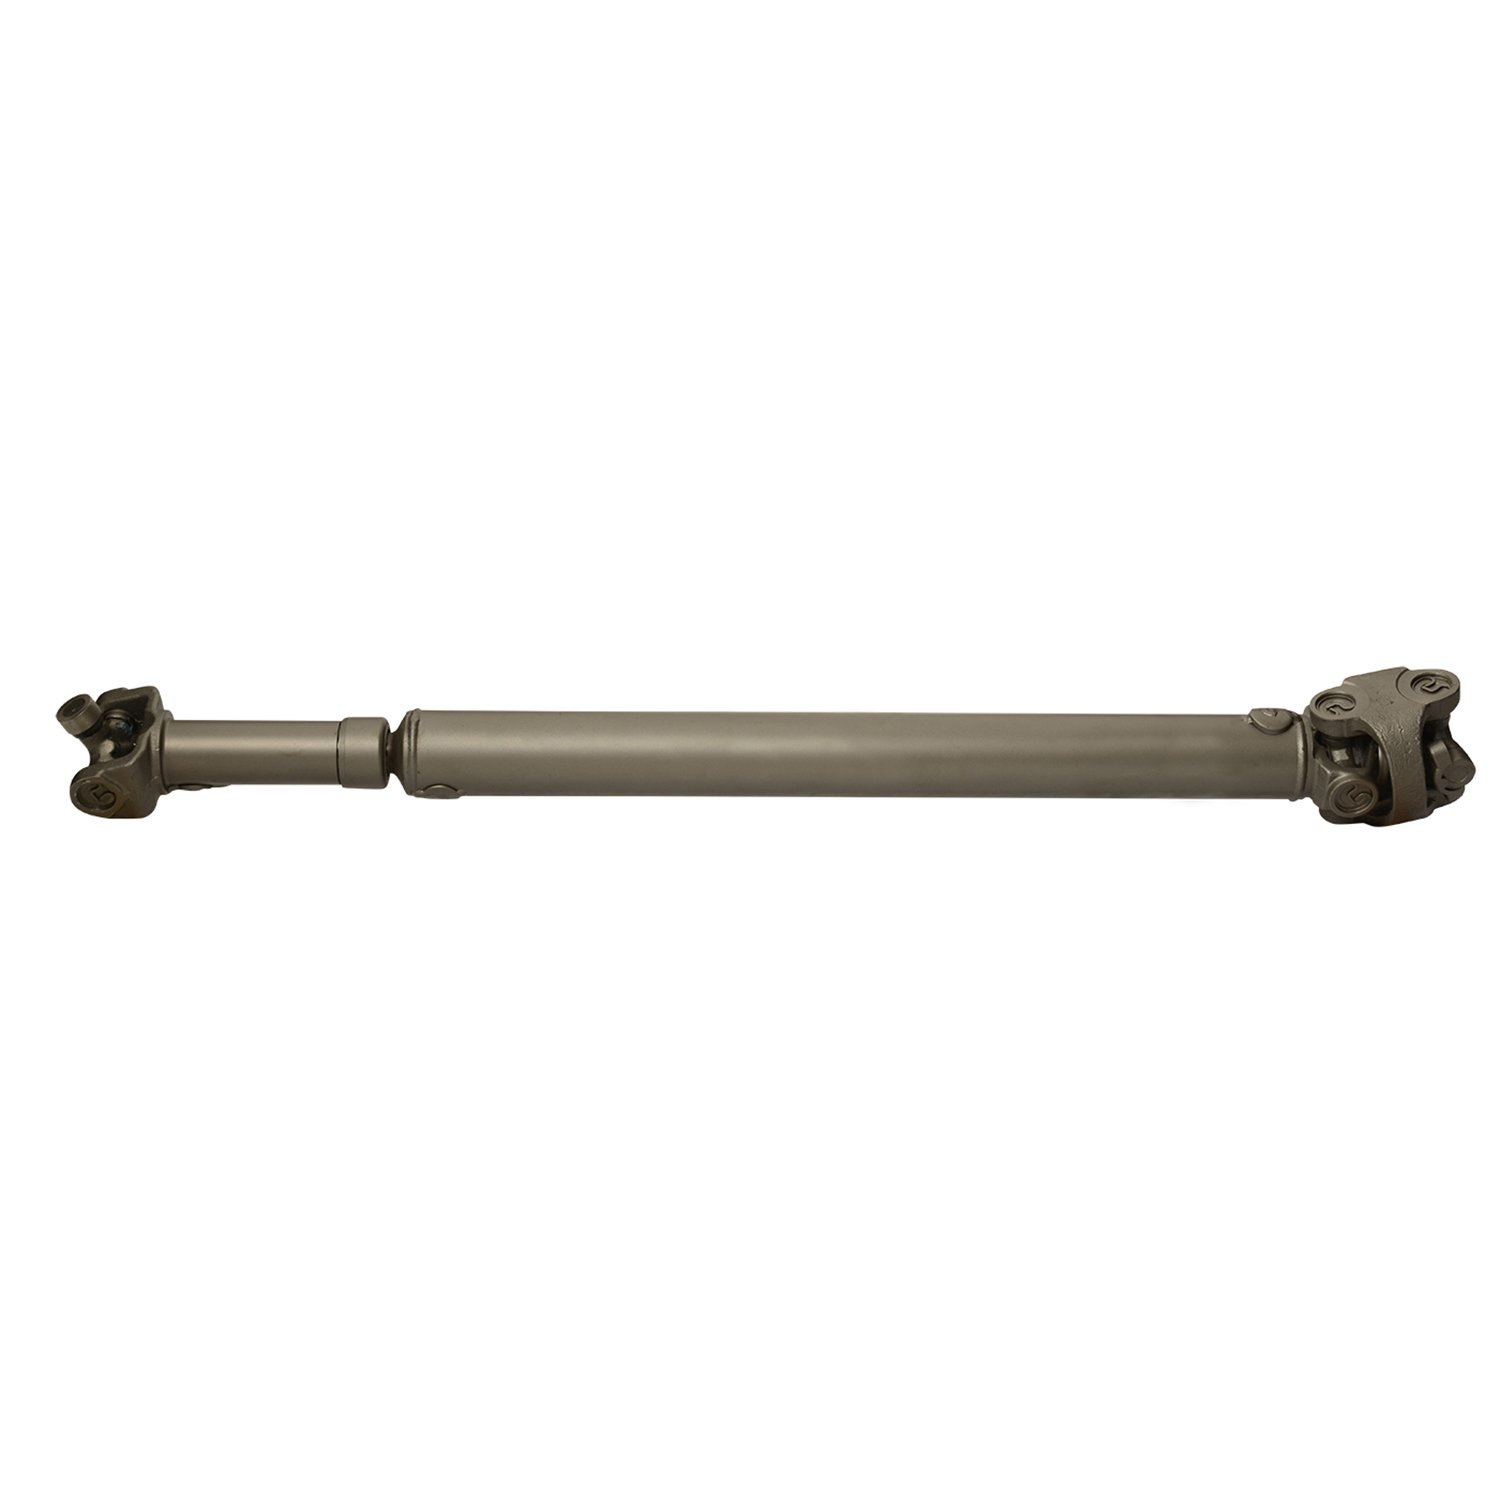 USA Standard ZDS9164 Rear Driveshaft, For Bronco, 34-5/16 in. Center-To-Center